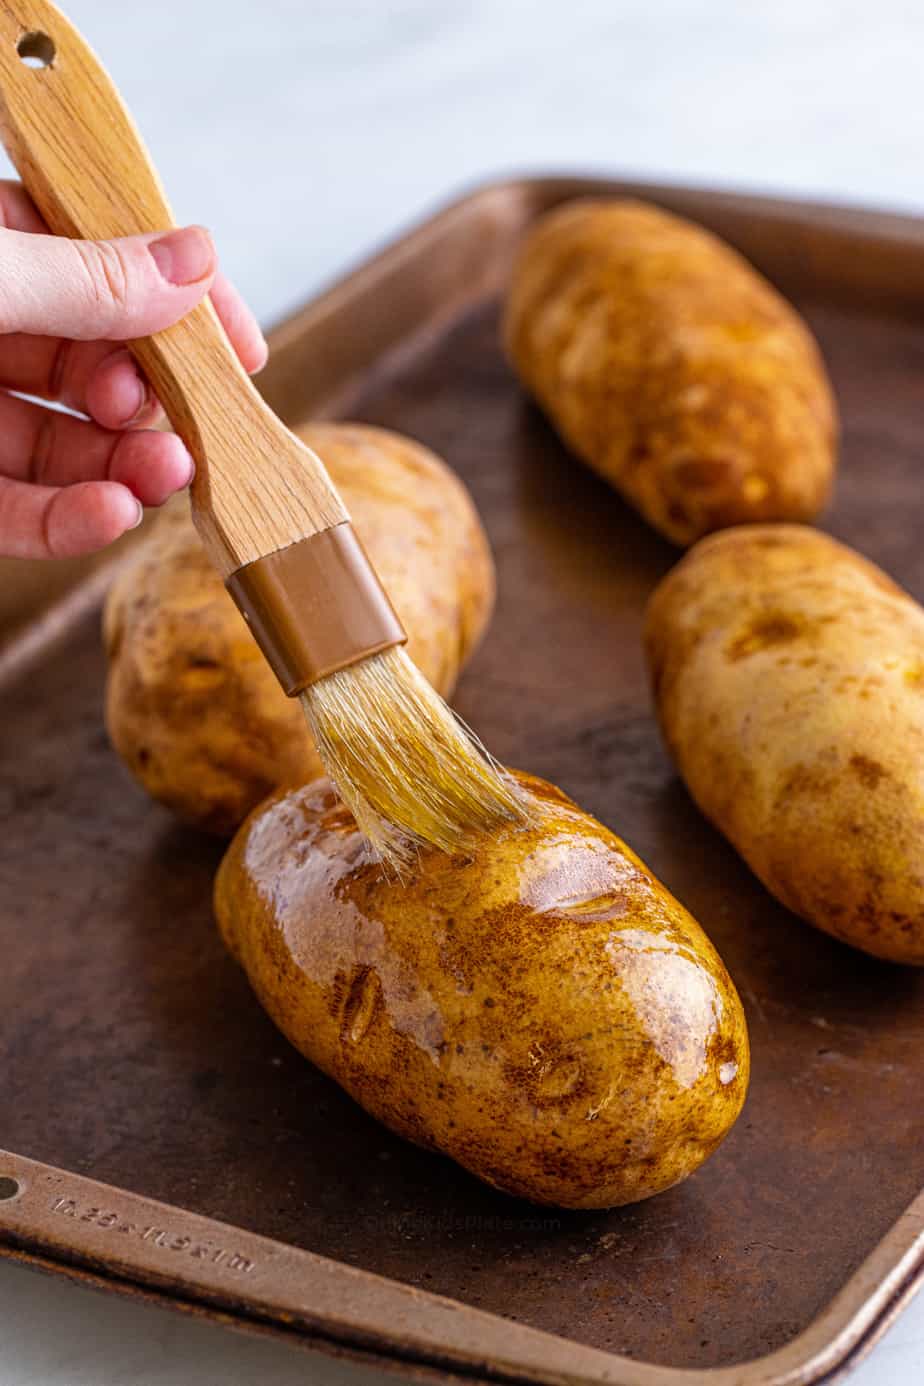 Brushing potatoes with oil